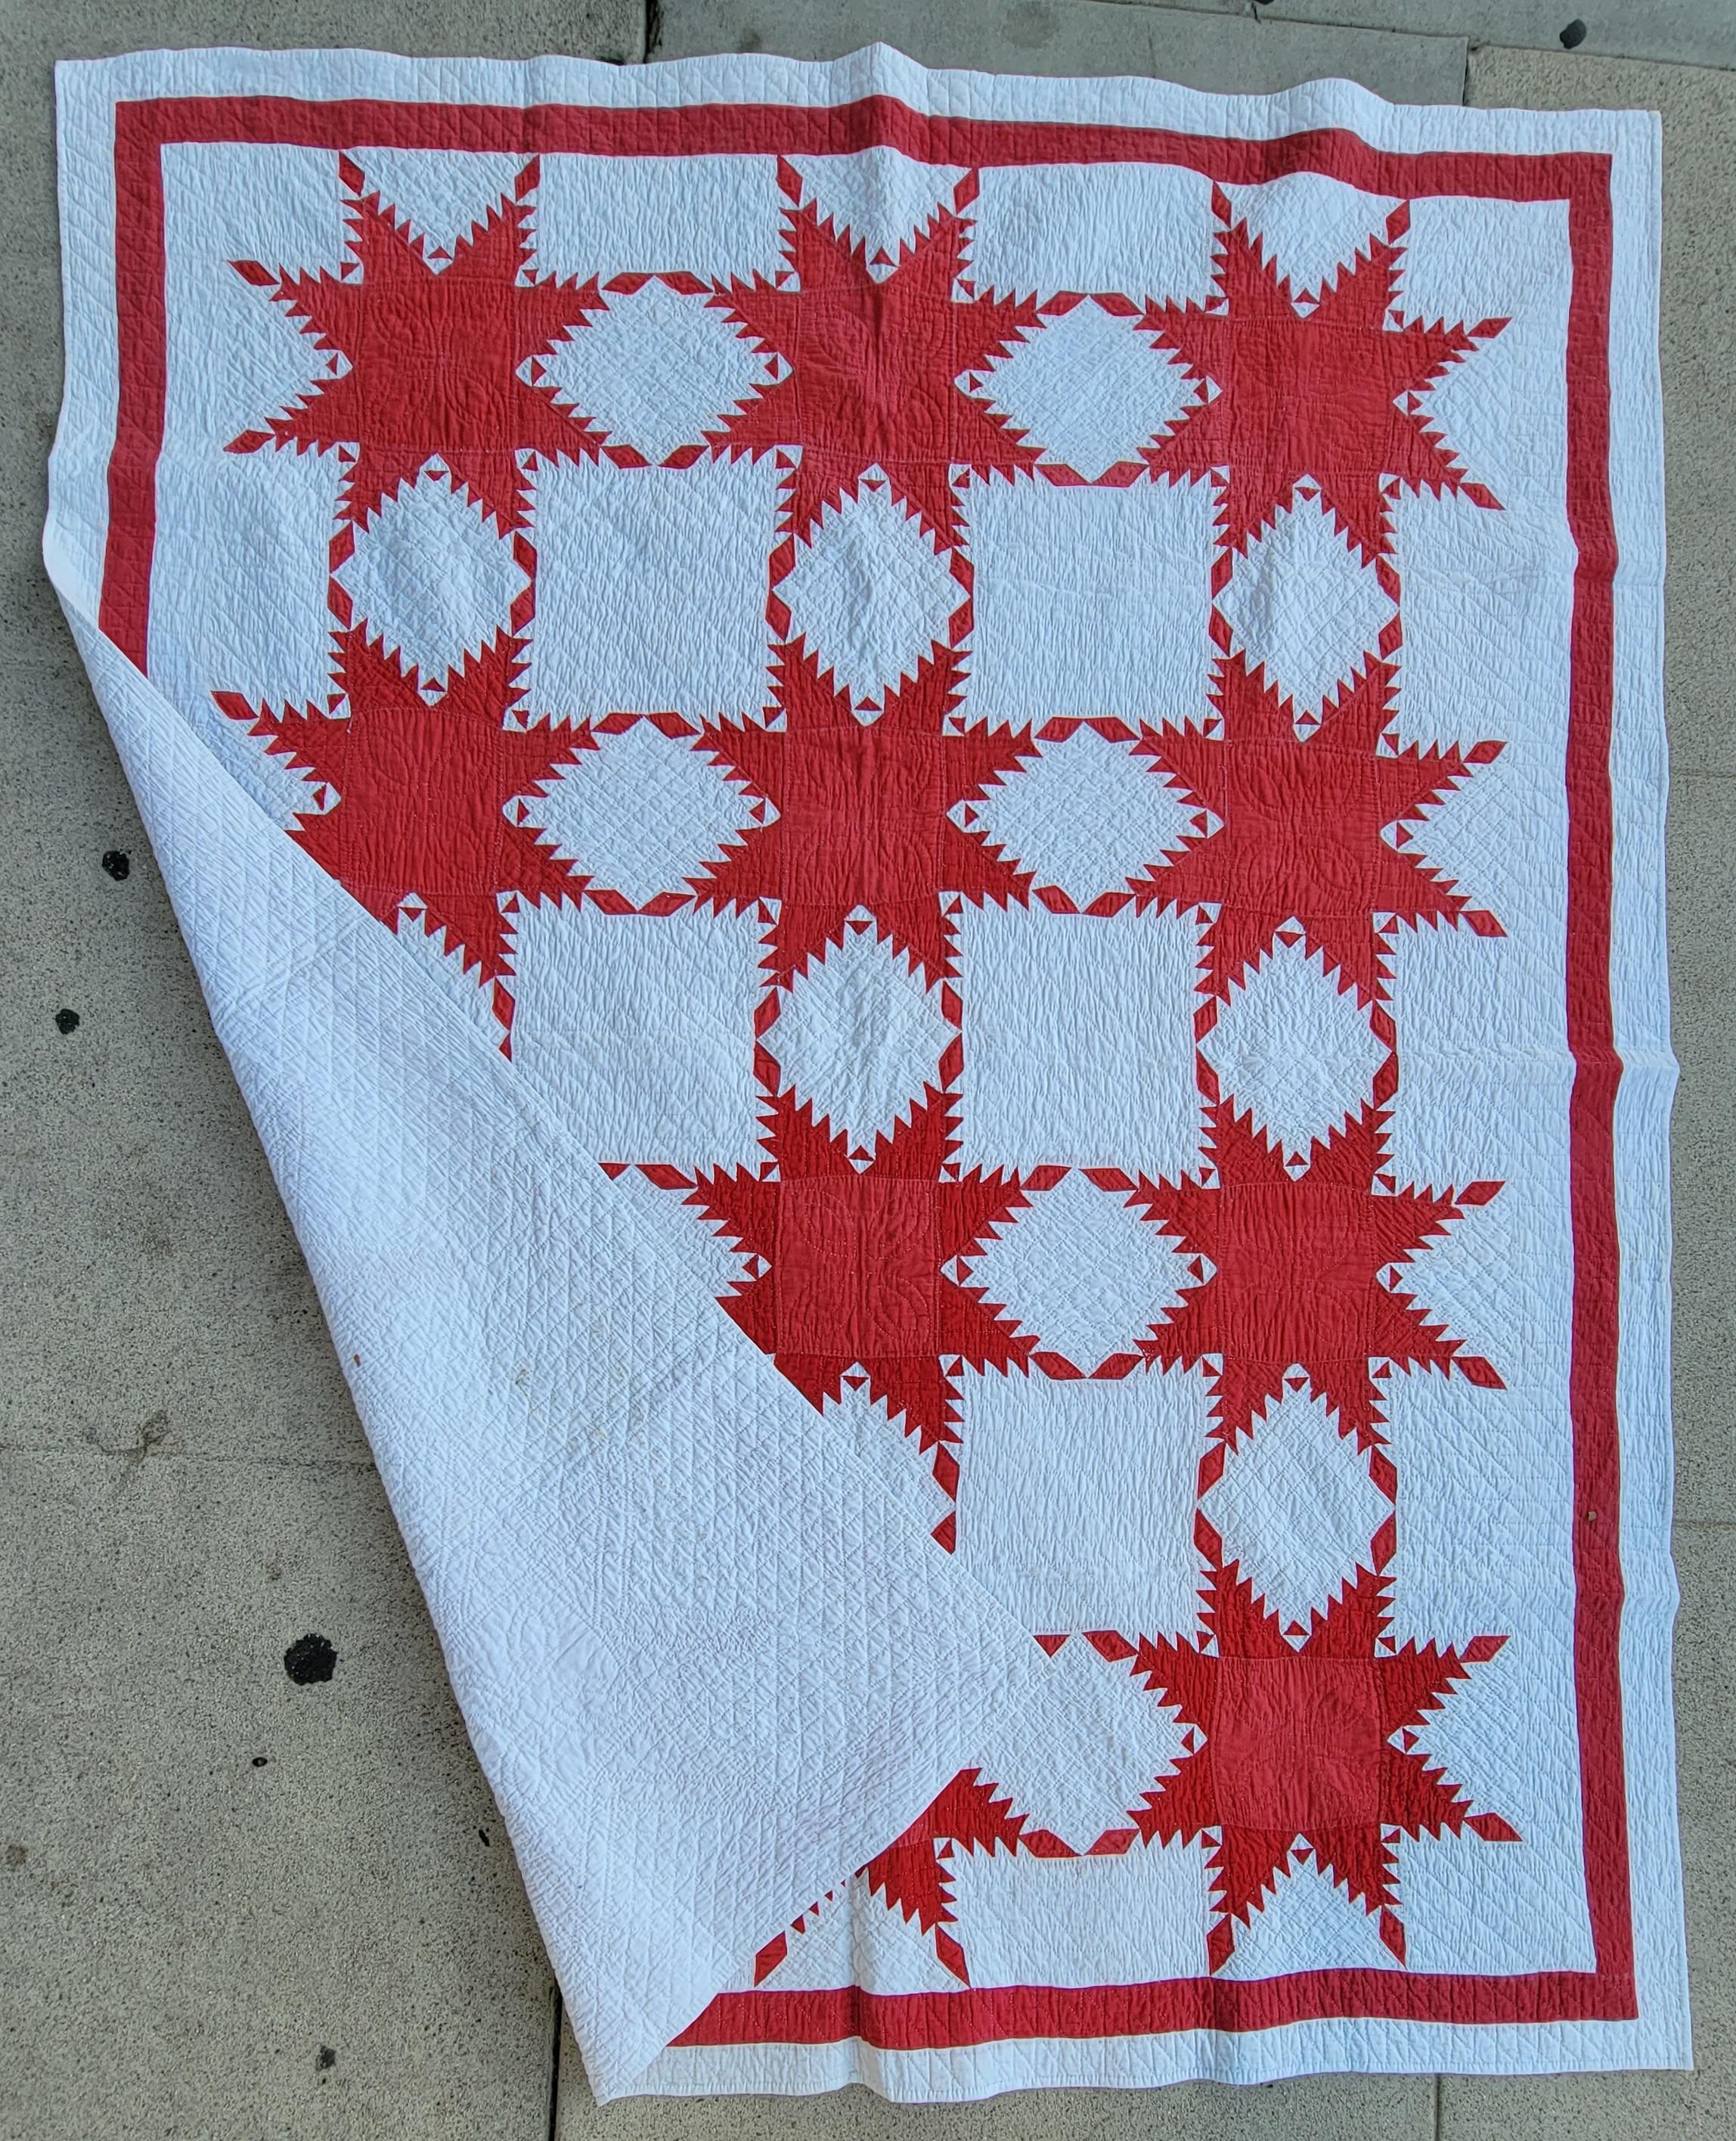 Hand-Crafted 19thc Red & White Feathered Star Quilt